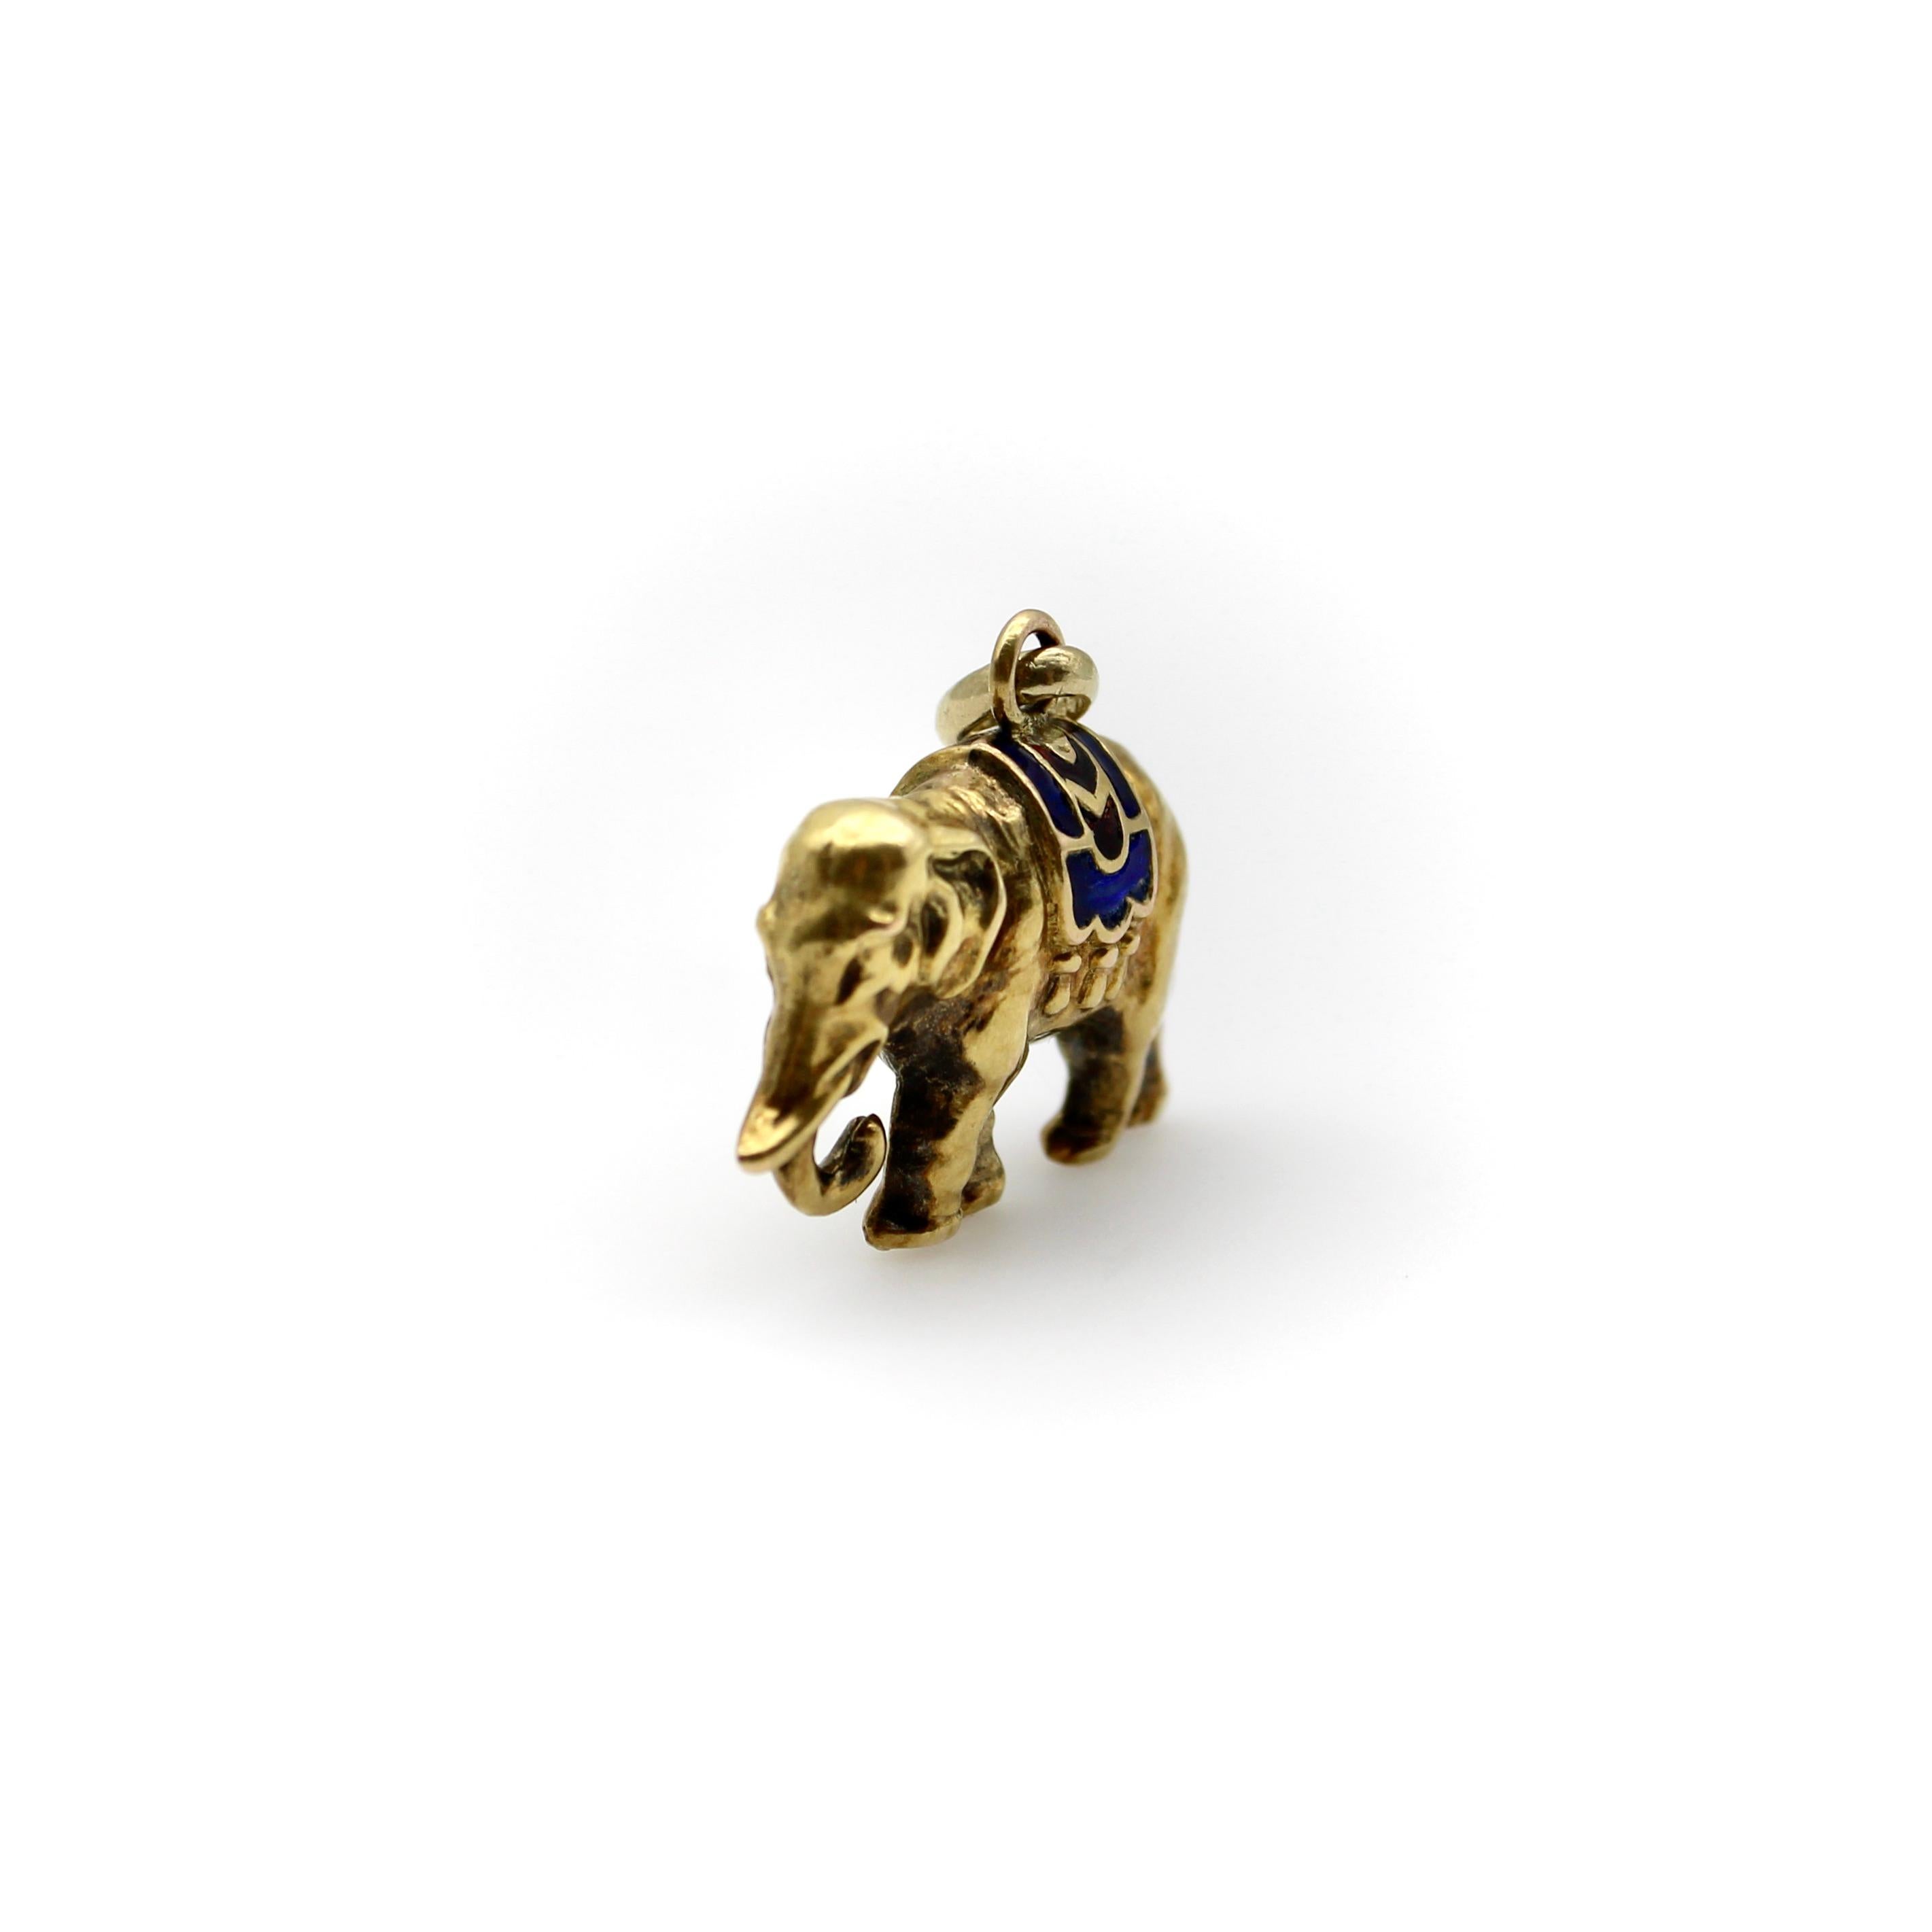 Circa the Edwardian era, this 14k gold elephant charm is beautifully detailed. It has an emotive face and a lovely patina from its age that gives the charm shading and depth. The elephant wears a pretty enamel saddle with red, royal blue, and teal